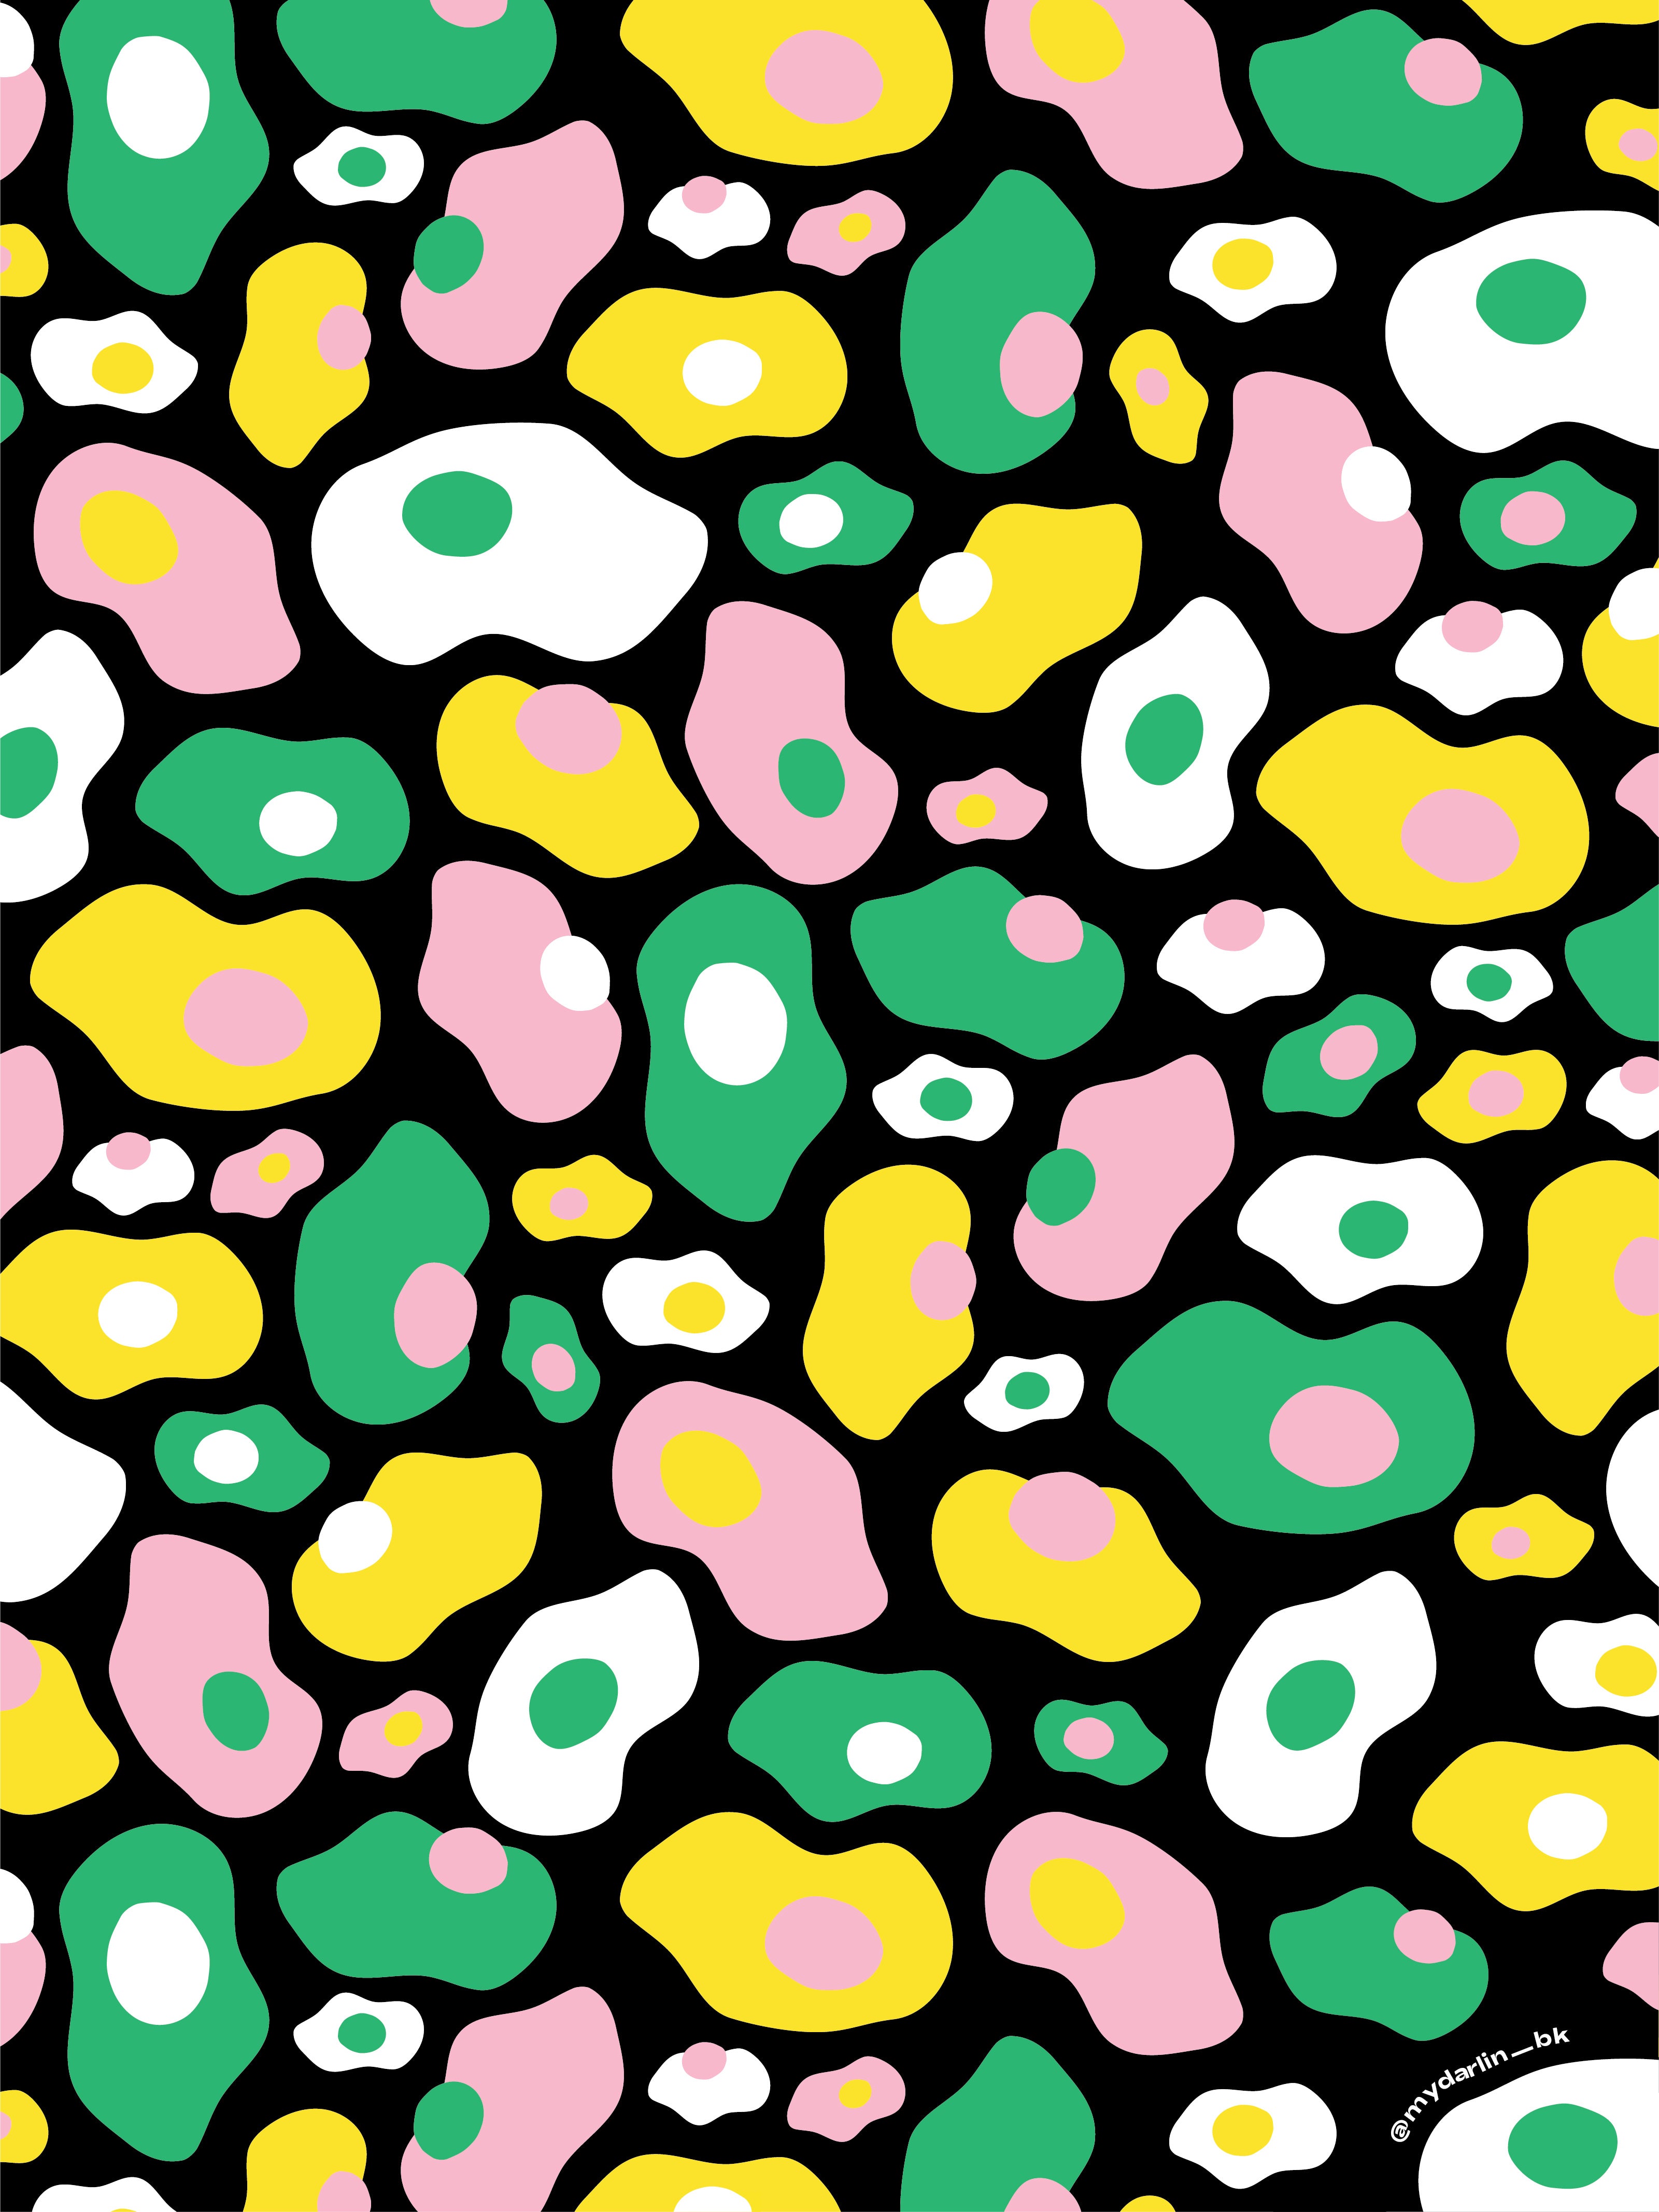 "Psychedelic Eggs" abstract eggs pattern free downloadable device wallpaper by @mydarlin_bk